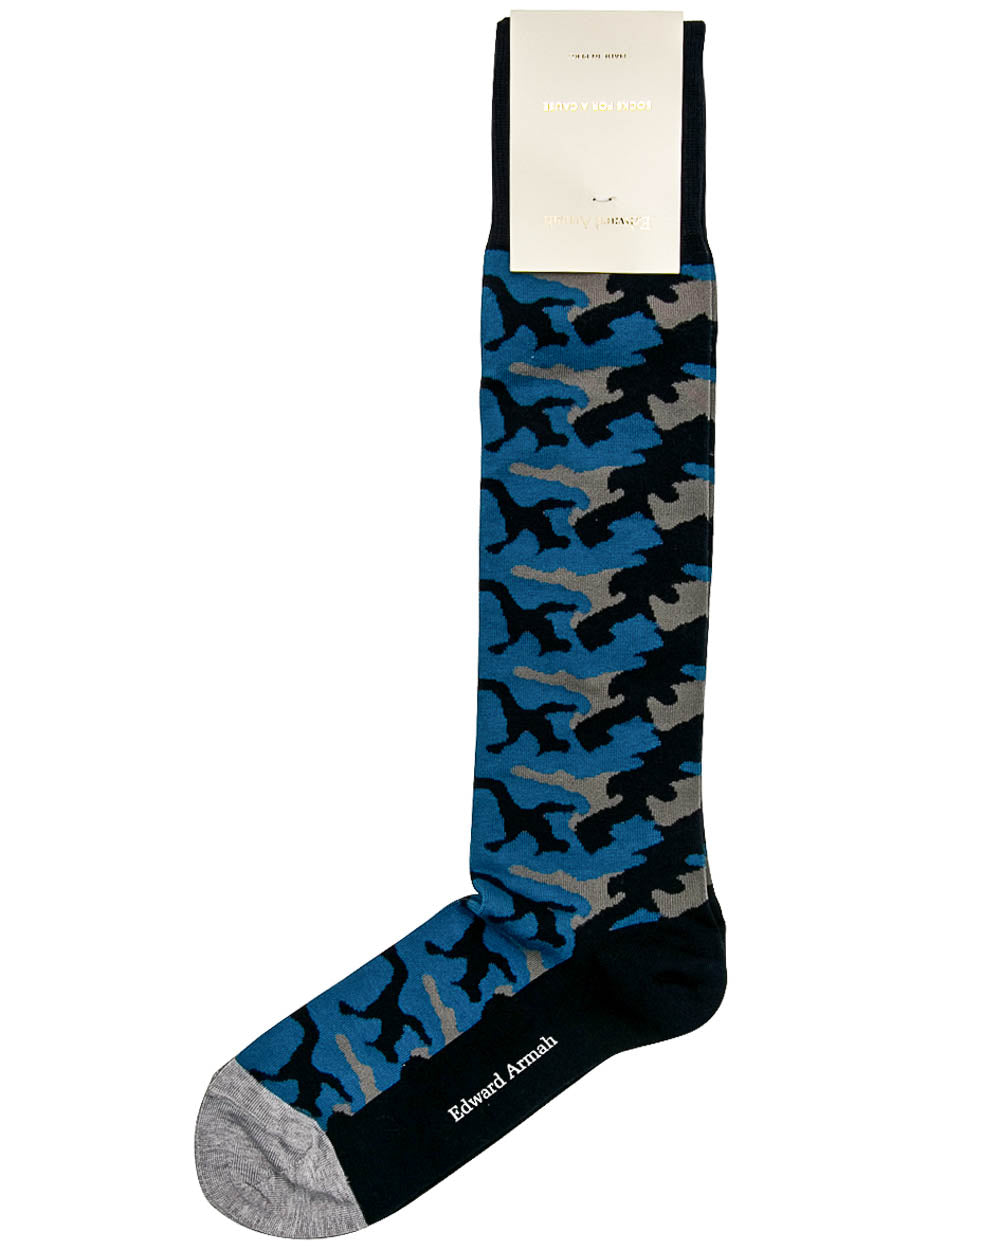 Navy and Grey Camo Over the Calf Sock